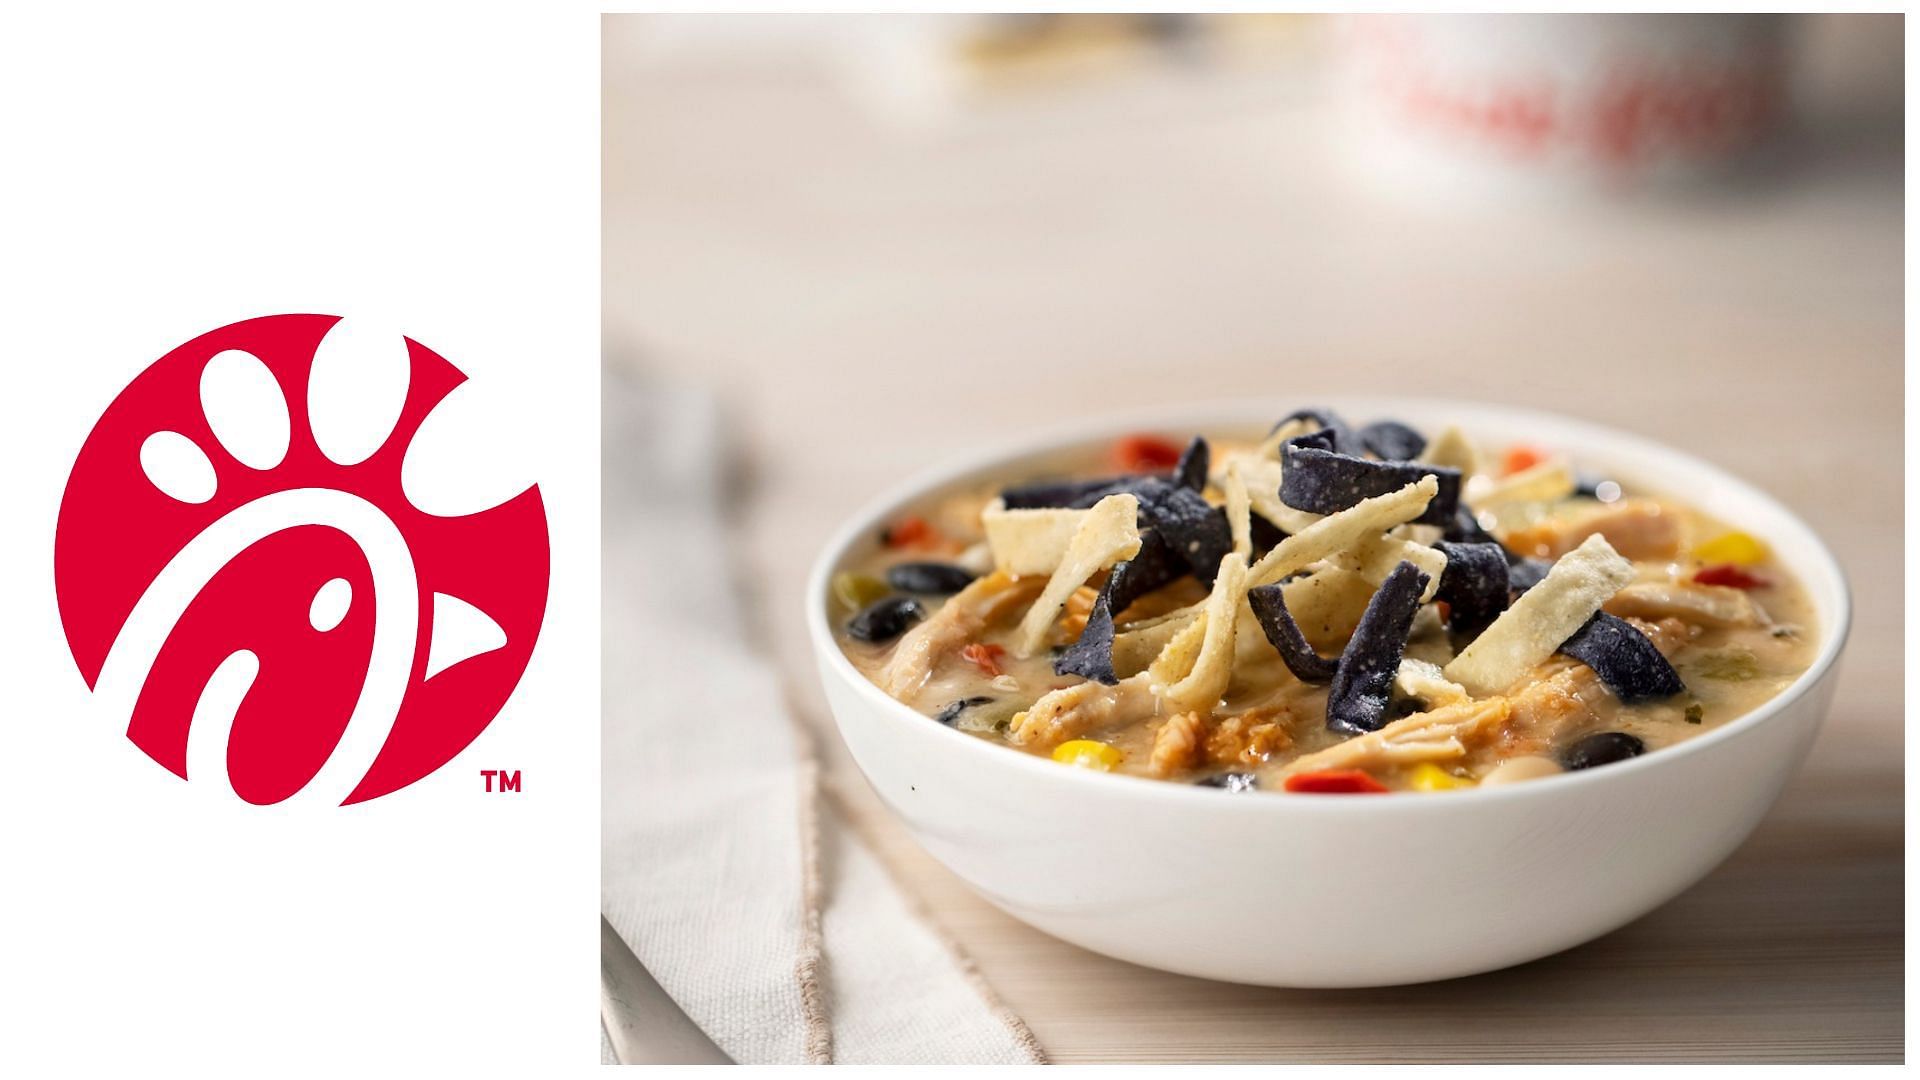 What are the ingredients of ChickfilA’s Chicken Tortilla Soup